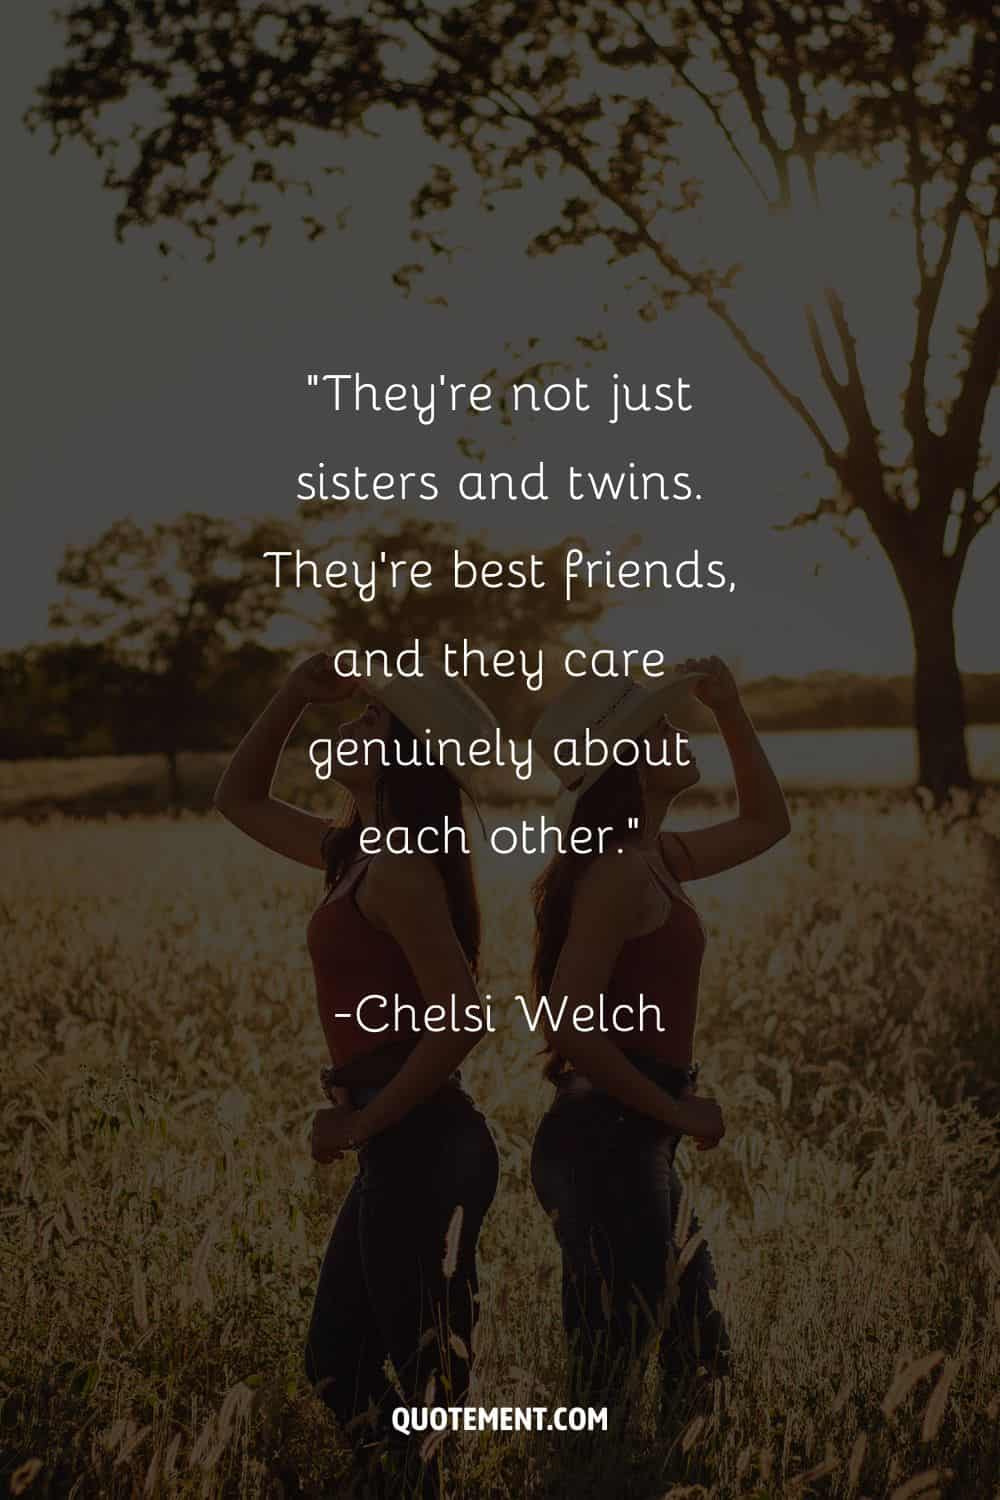 “They’re not just sisters and twins. They’re best friends, and they care genuinely about each other.” – Chelsi Welch